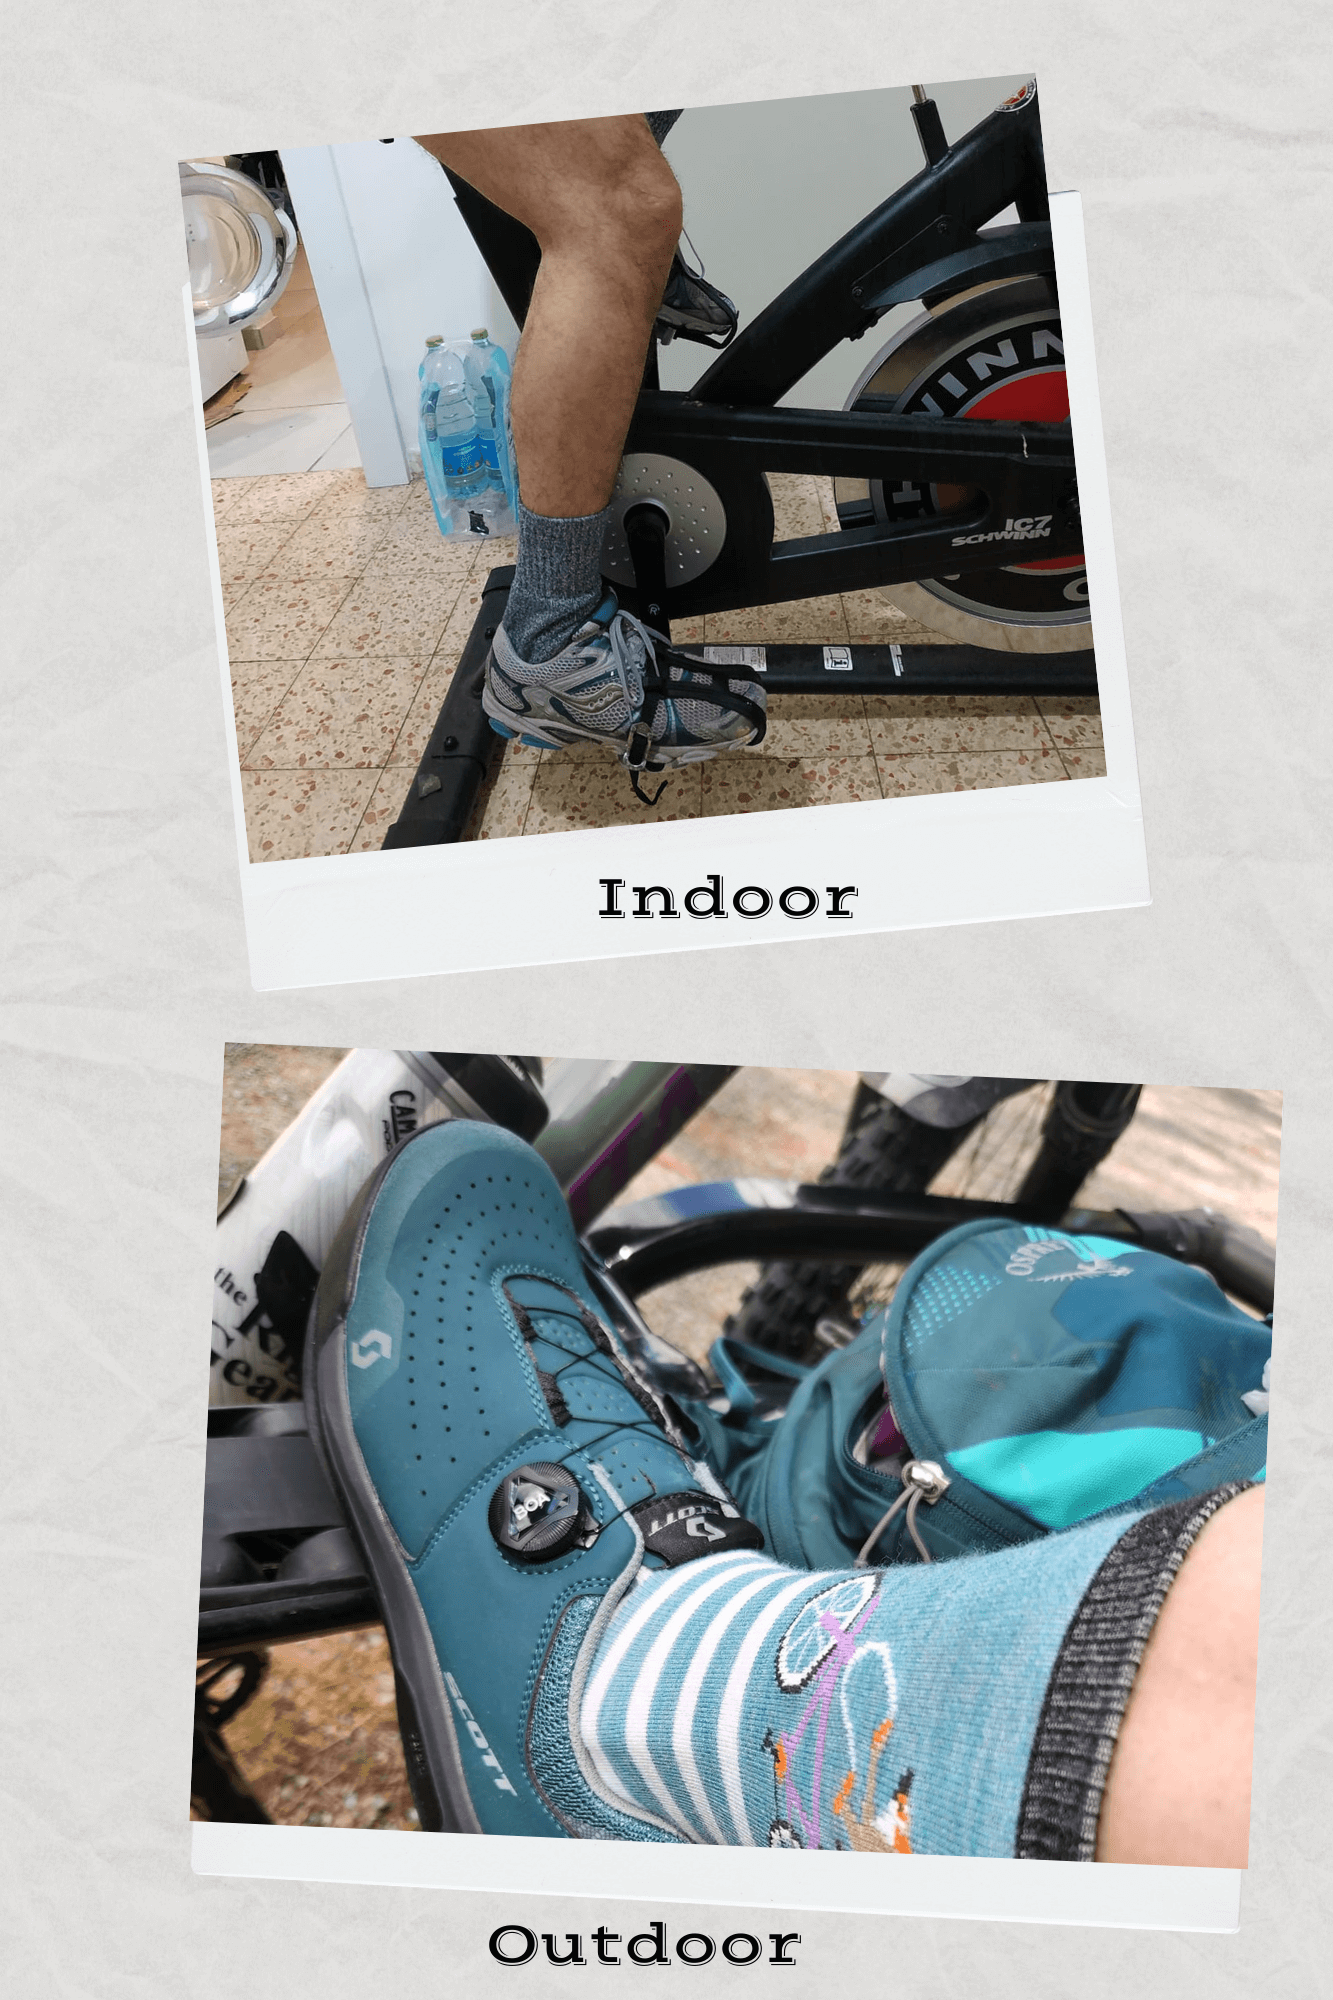 Indoor Vs Outdoor Cycling Shoes